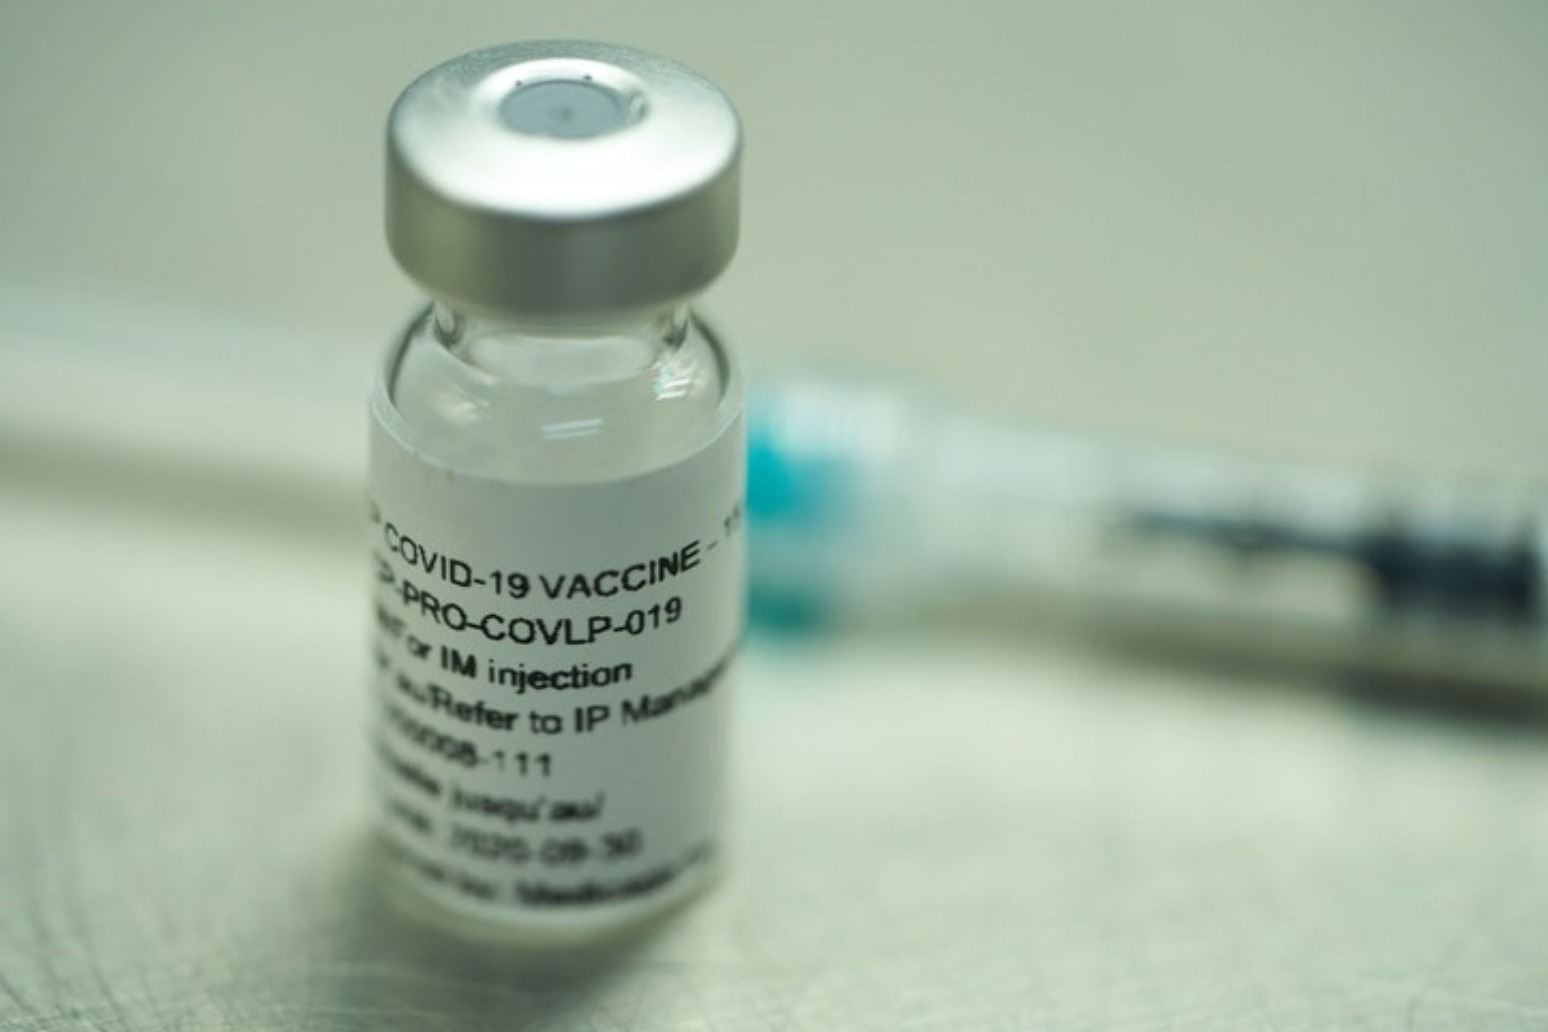 UK Government signs deal for 90 million doses of potential Covid-19 vaccines 